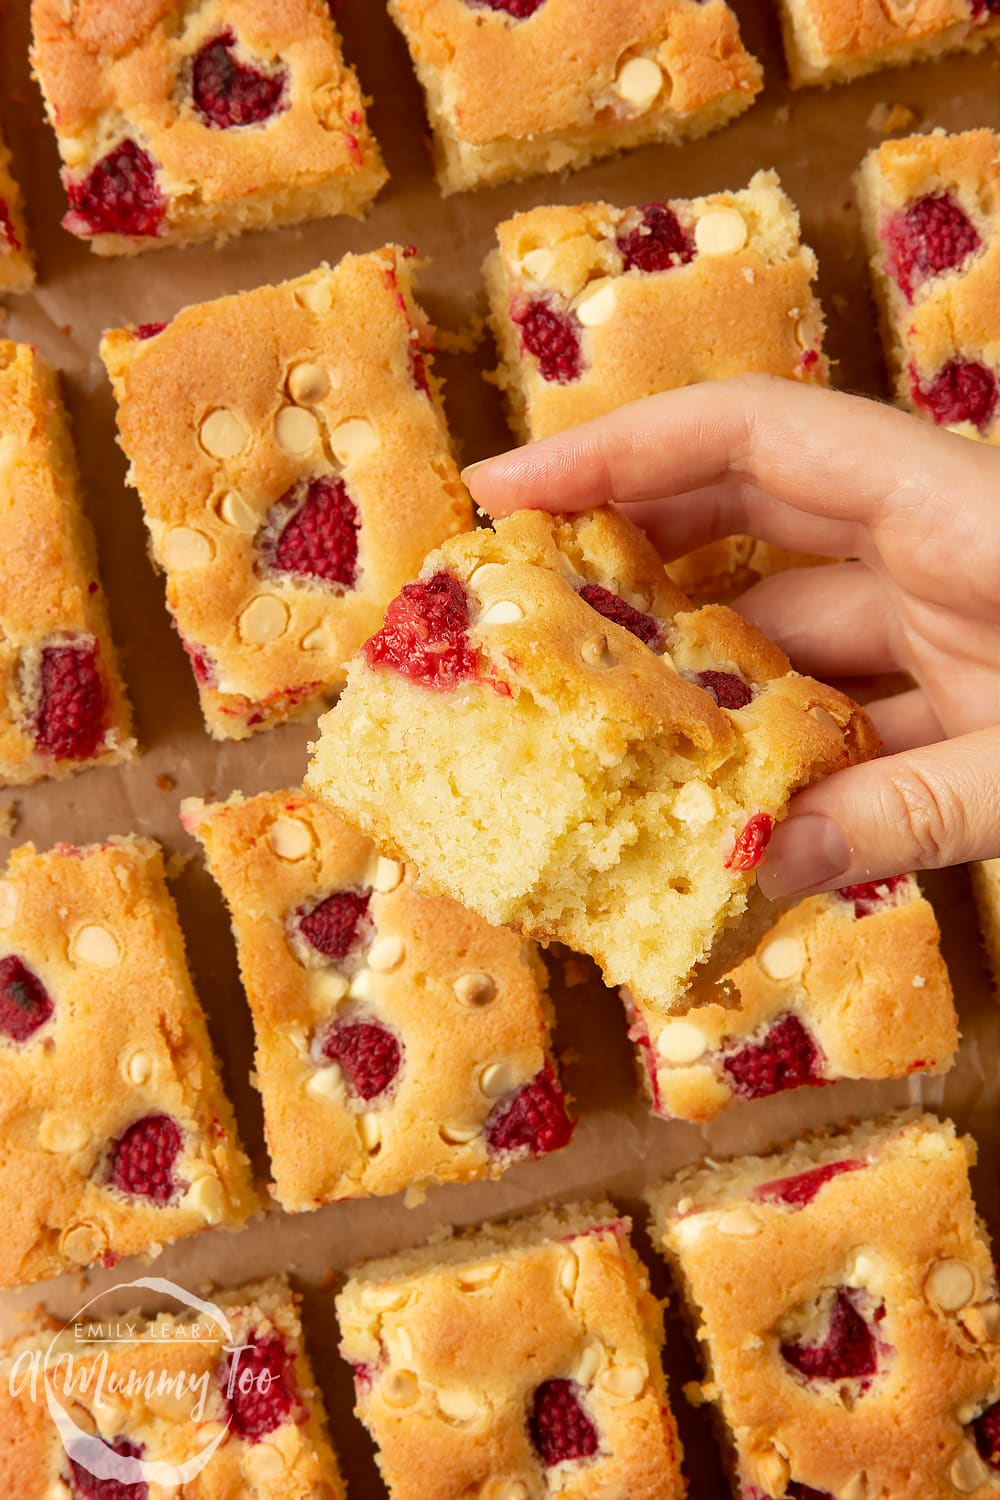 Servings of the raspberry and white chocolate traybake